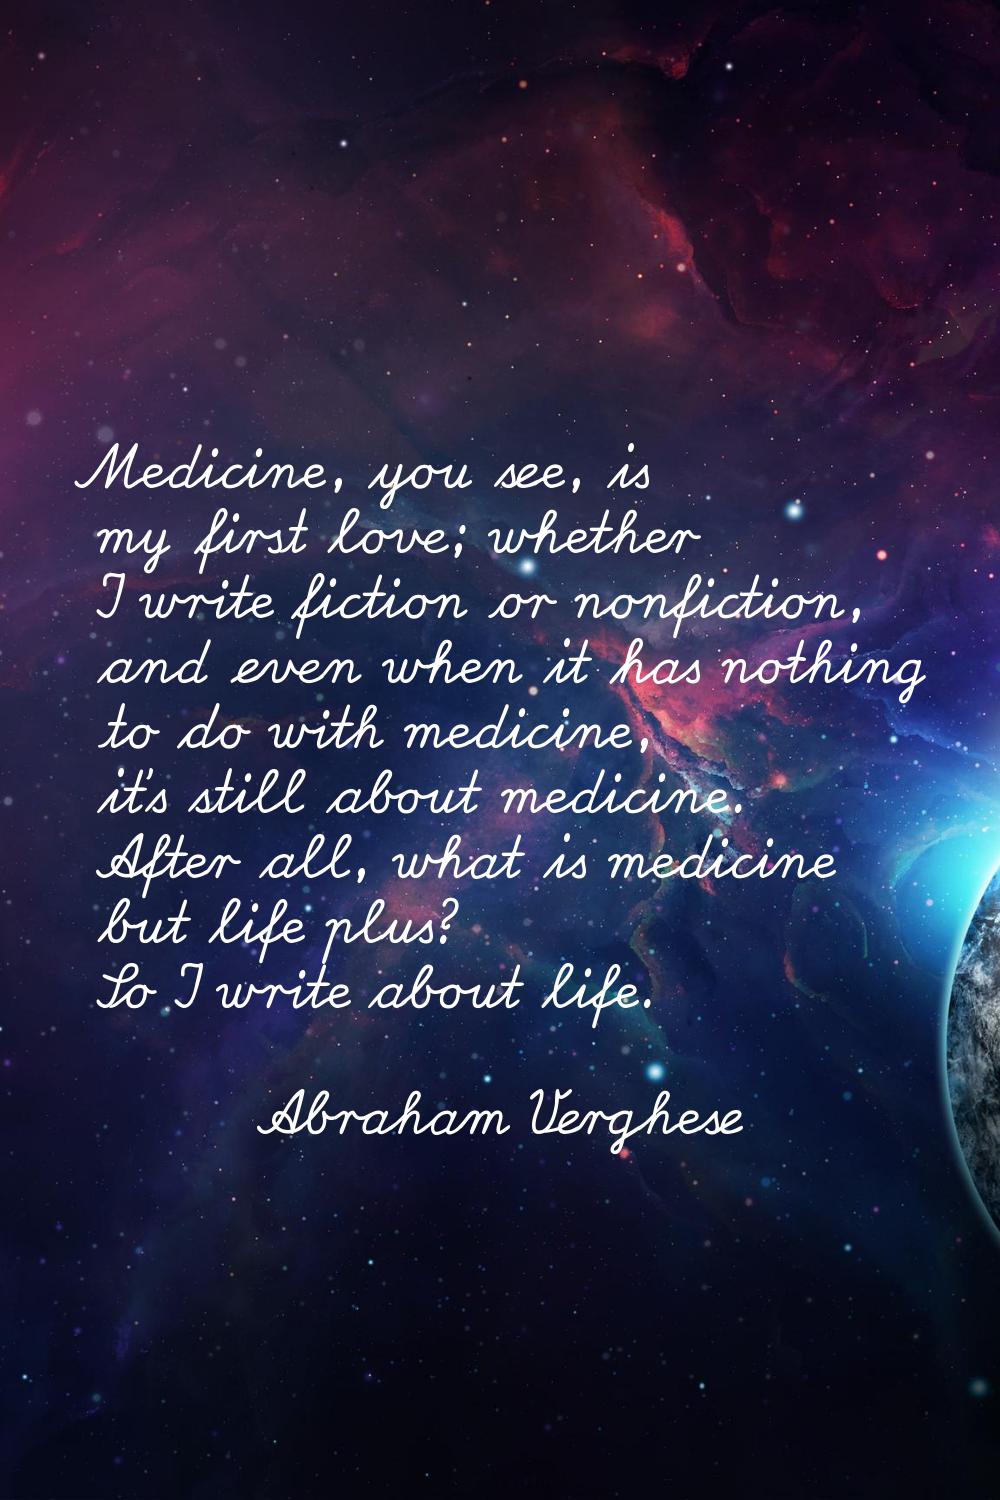 Medicine, you see, is my first love; whether I write fiction or nonfiction, and even when it has no